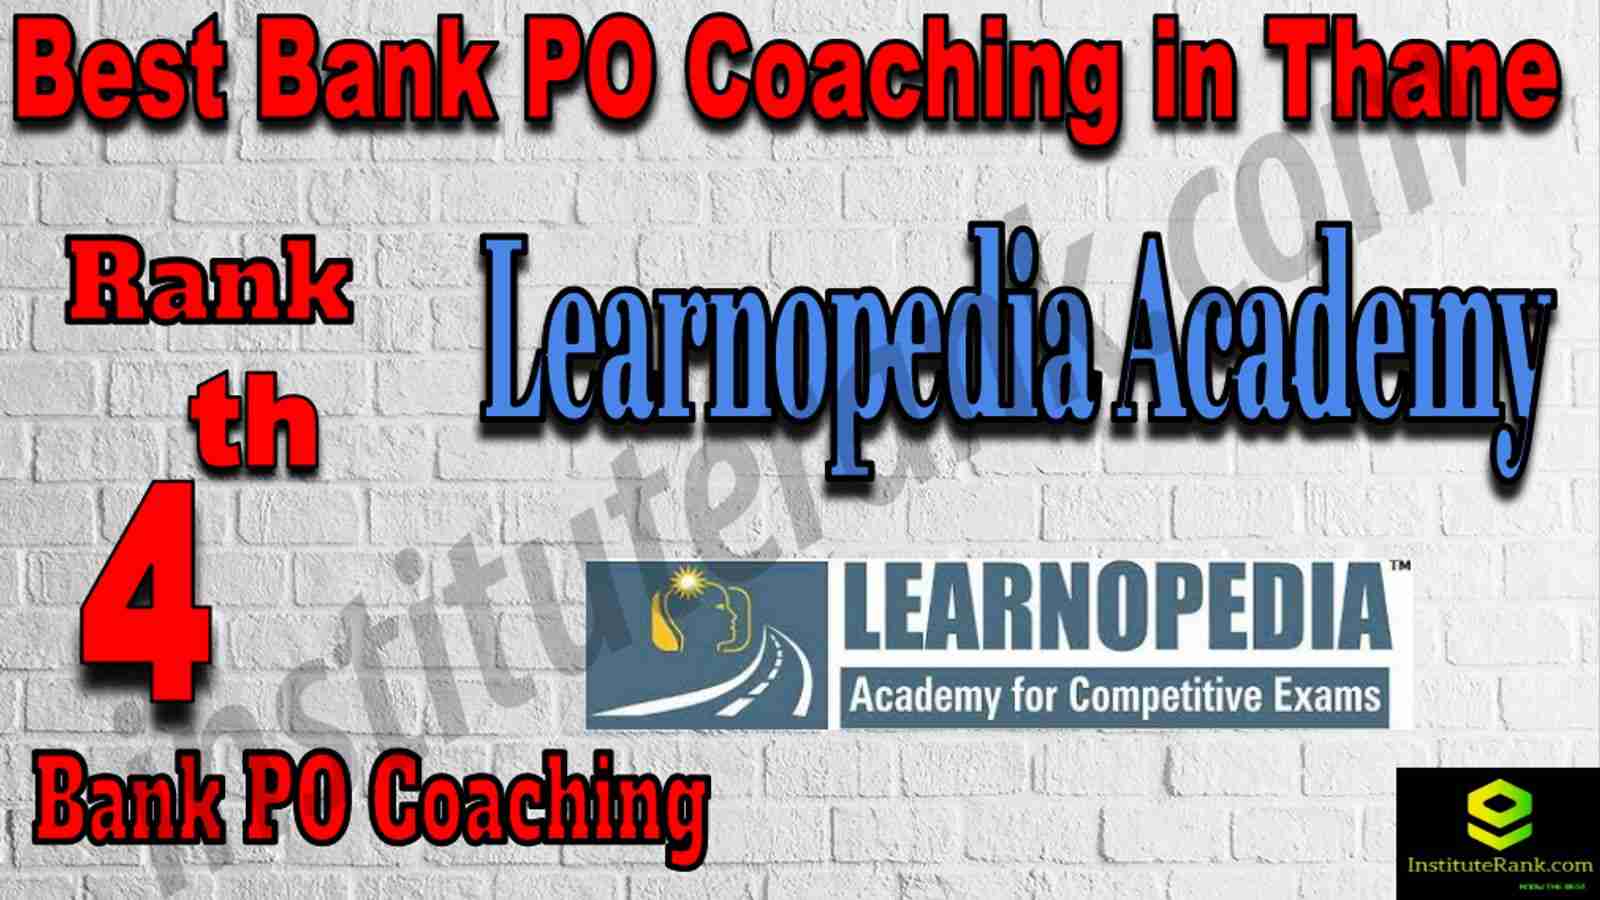 4th Best Bank PO Coaching in Thane